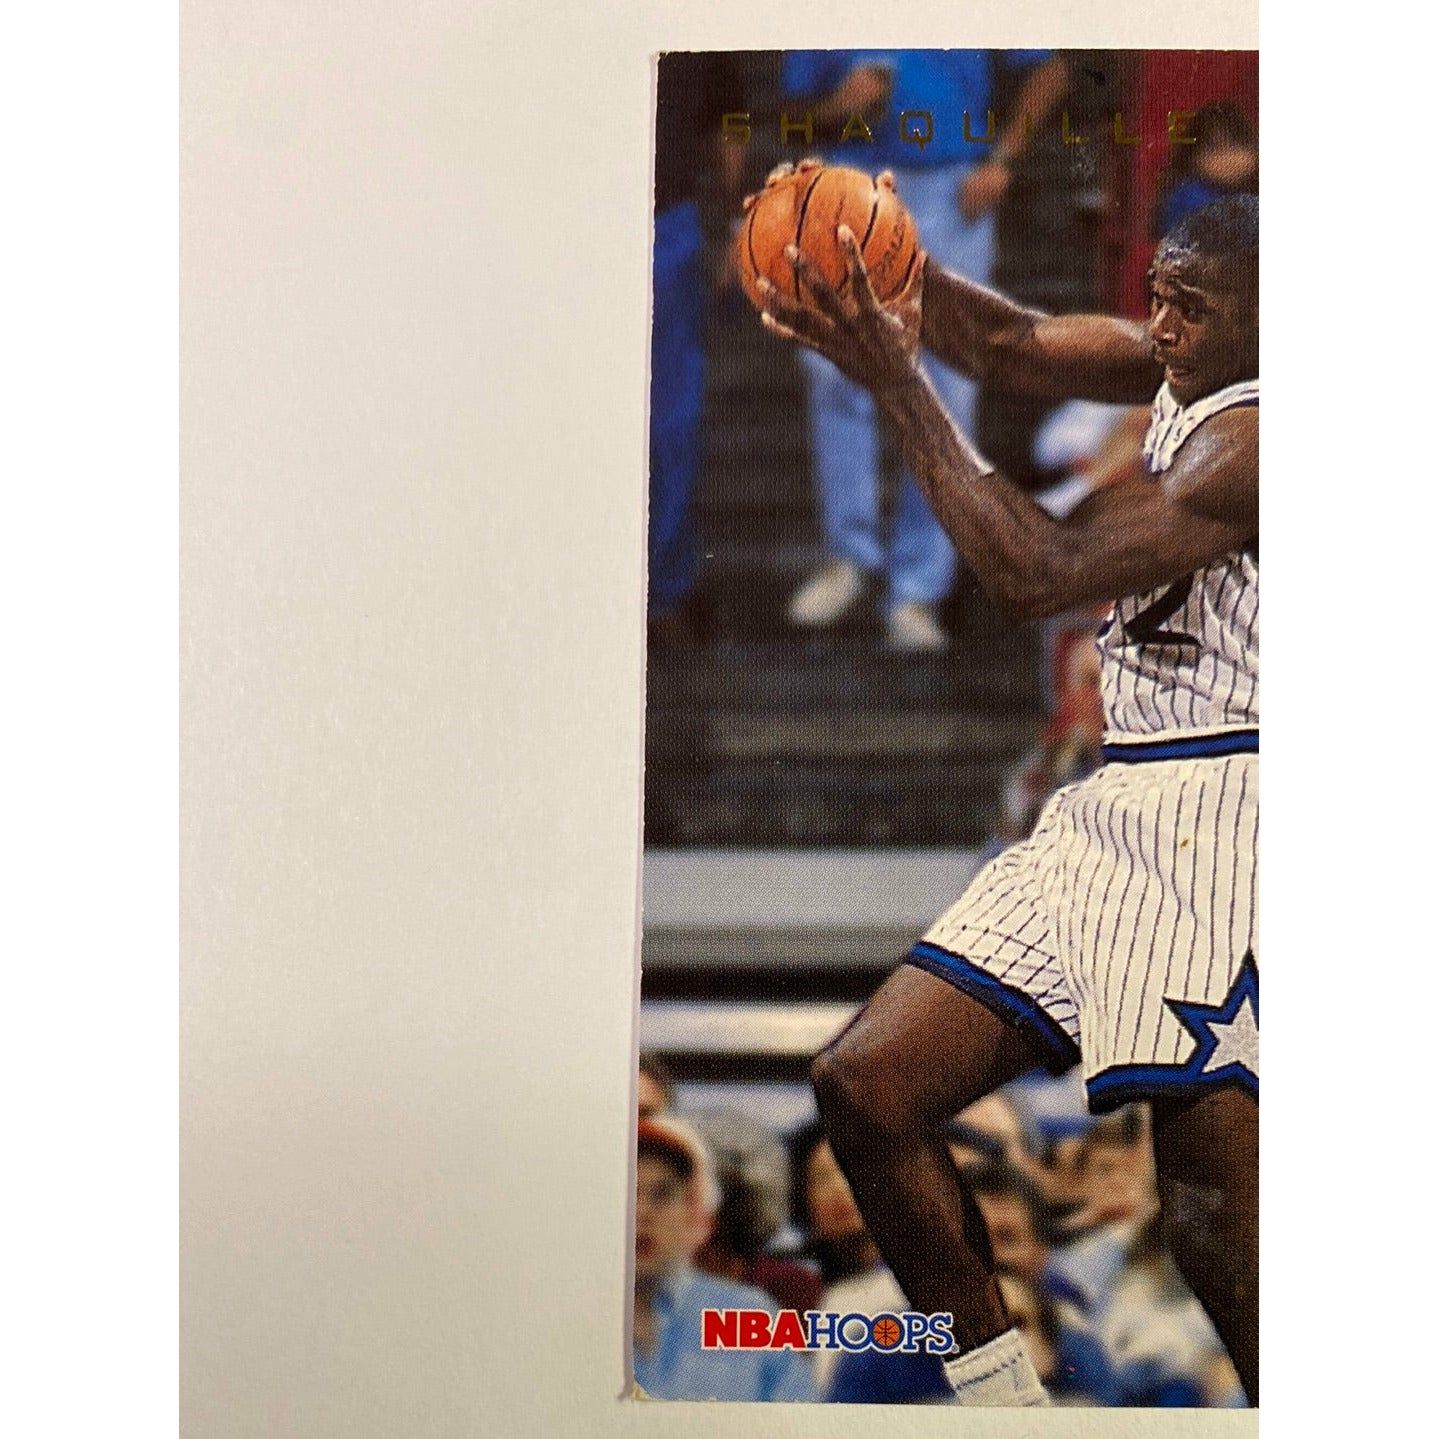  1994-95 Skybox Shaquille O’Neal Admirals Choice  Local Legends Cards & Collectibles